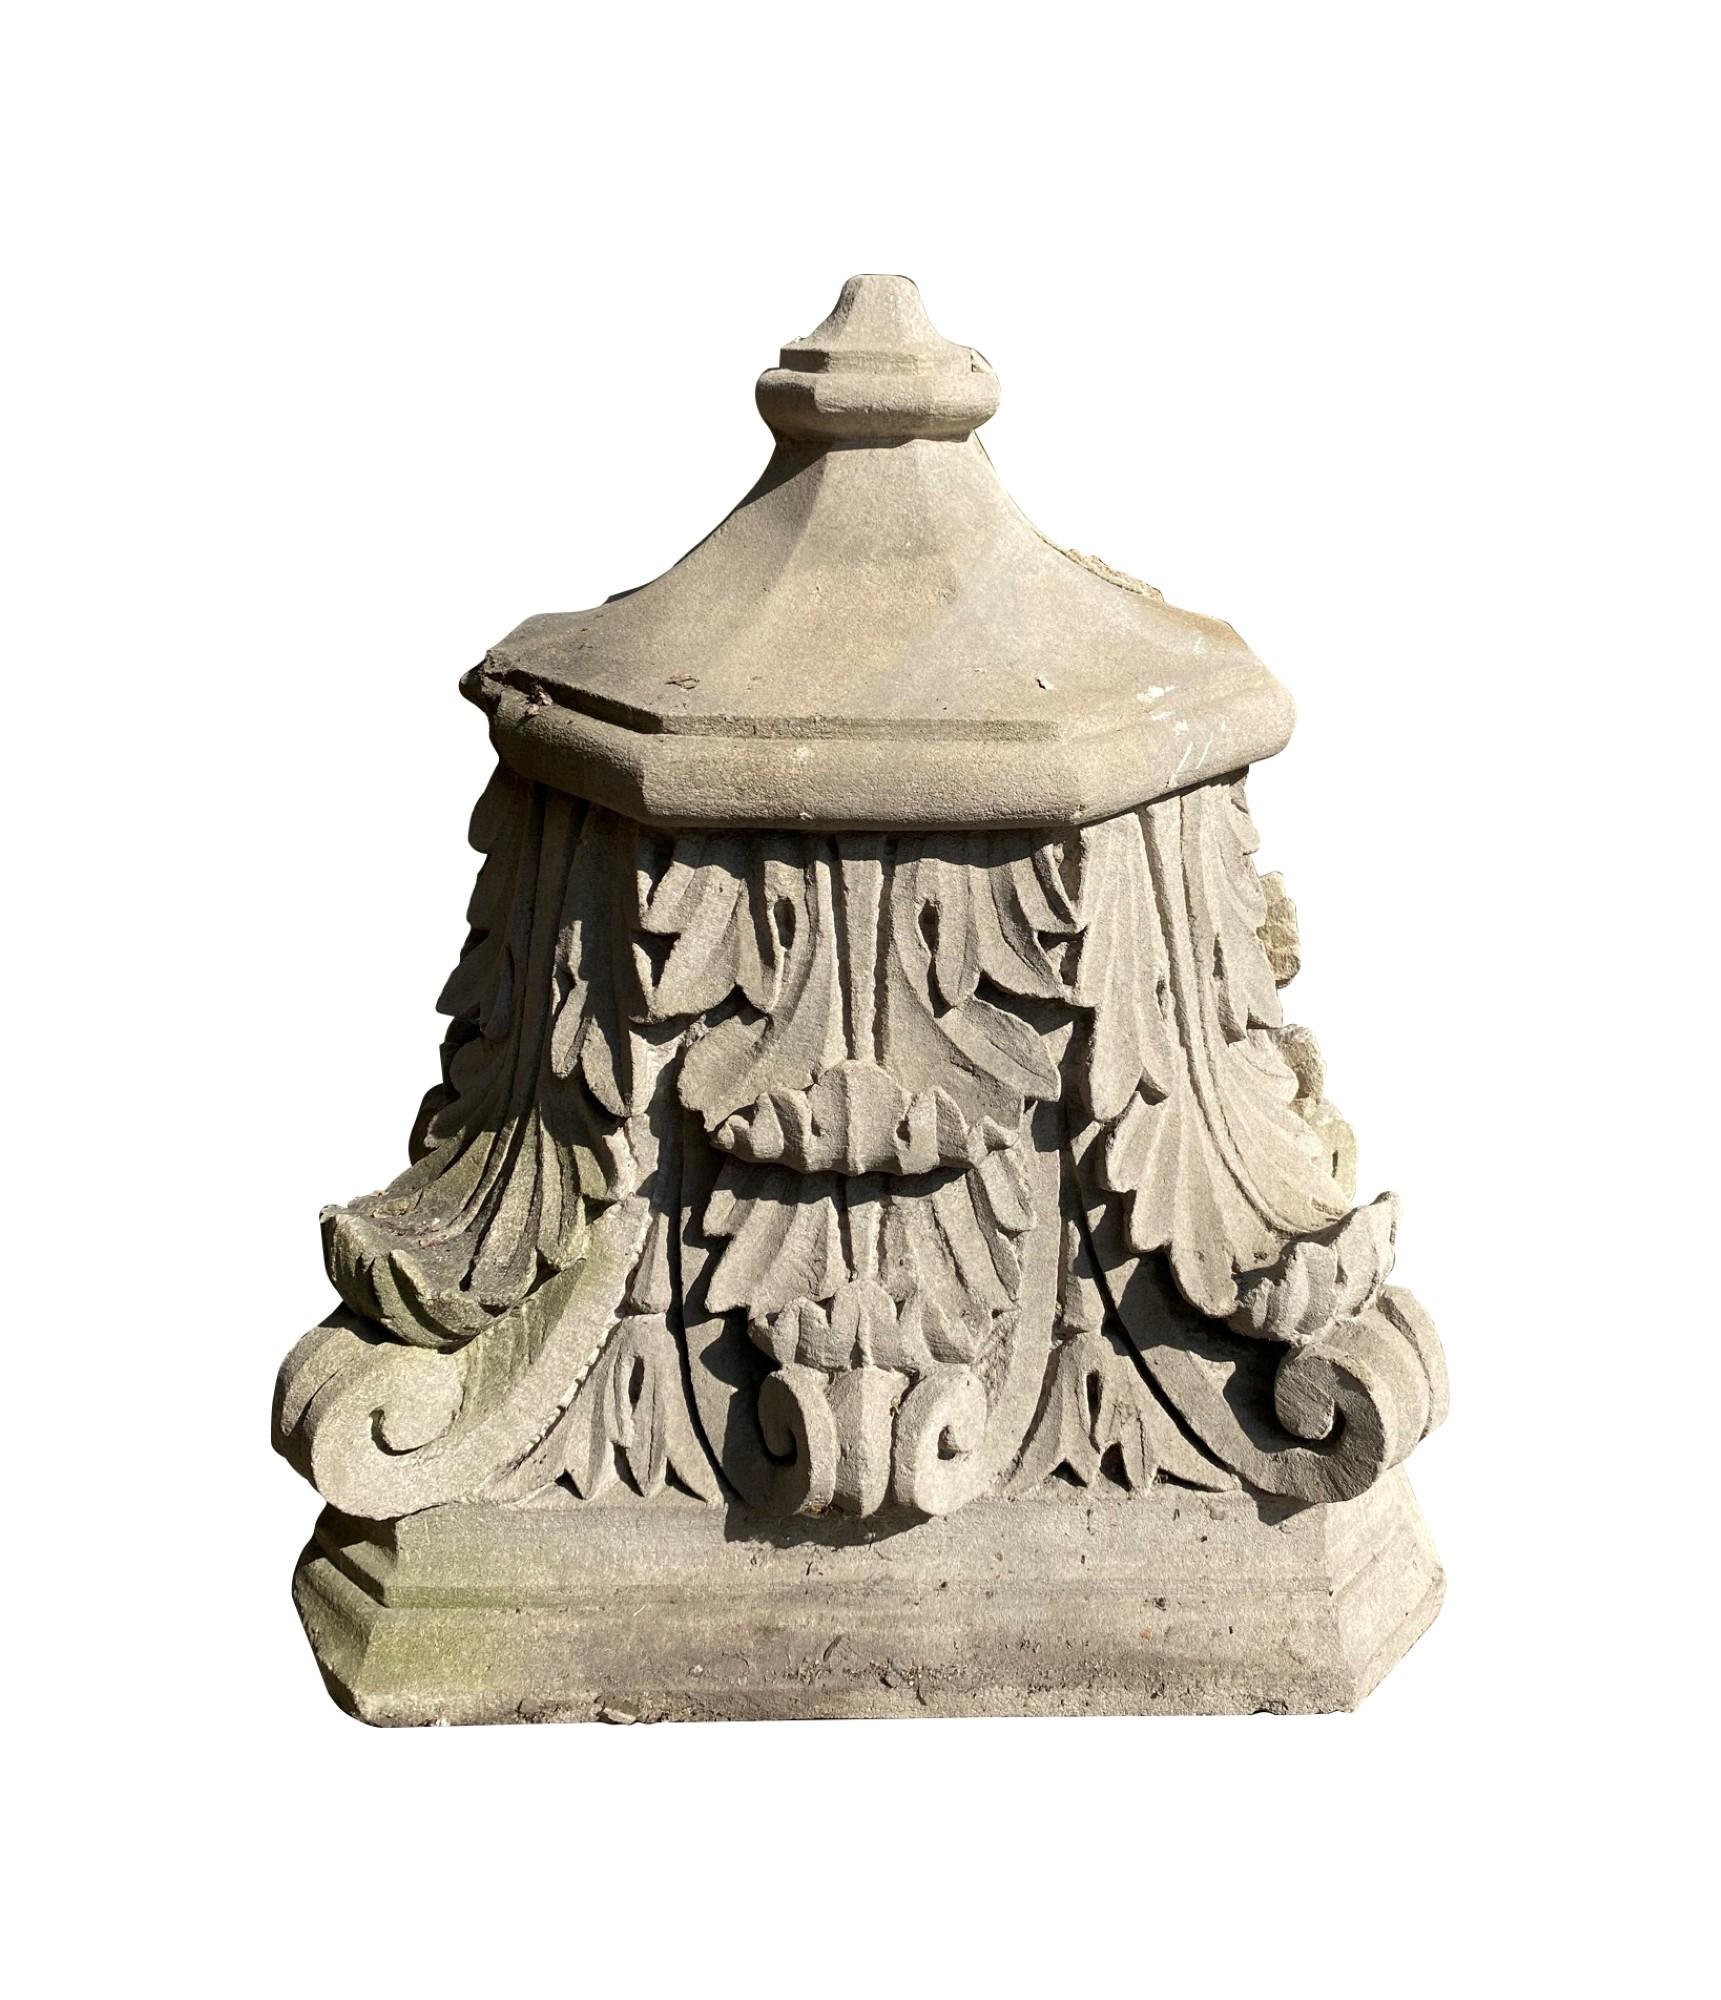 Carved limestone acanthus leaf architectural corbels. Reclaimed from a 19th century Long Island, NY hospital. These could be used as wall mounted shelves or shelf brackets or a unique piece in a garden. Small quantity available at time of posting.